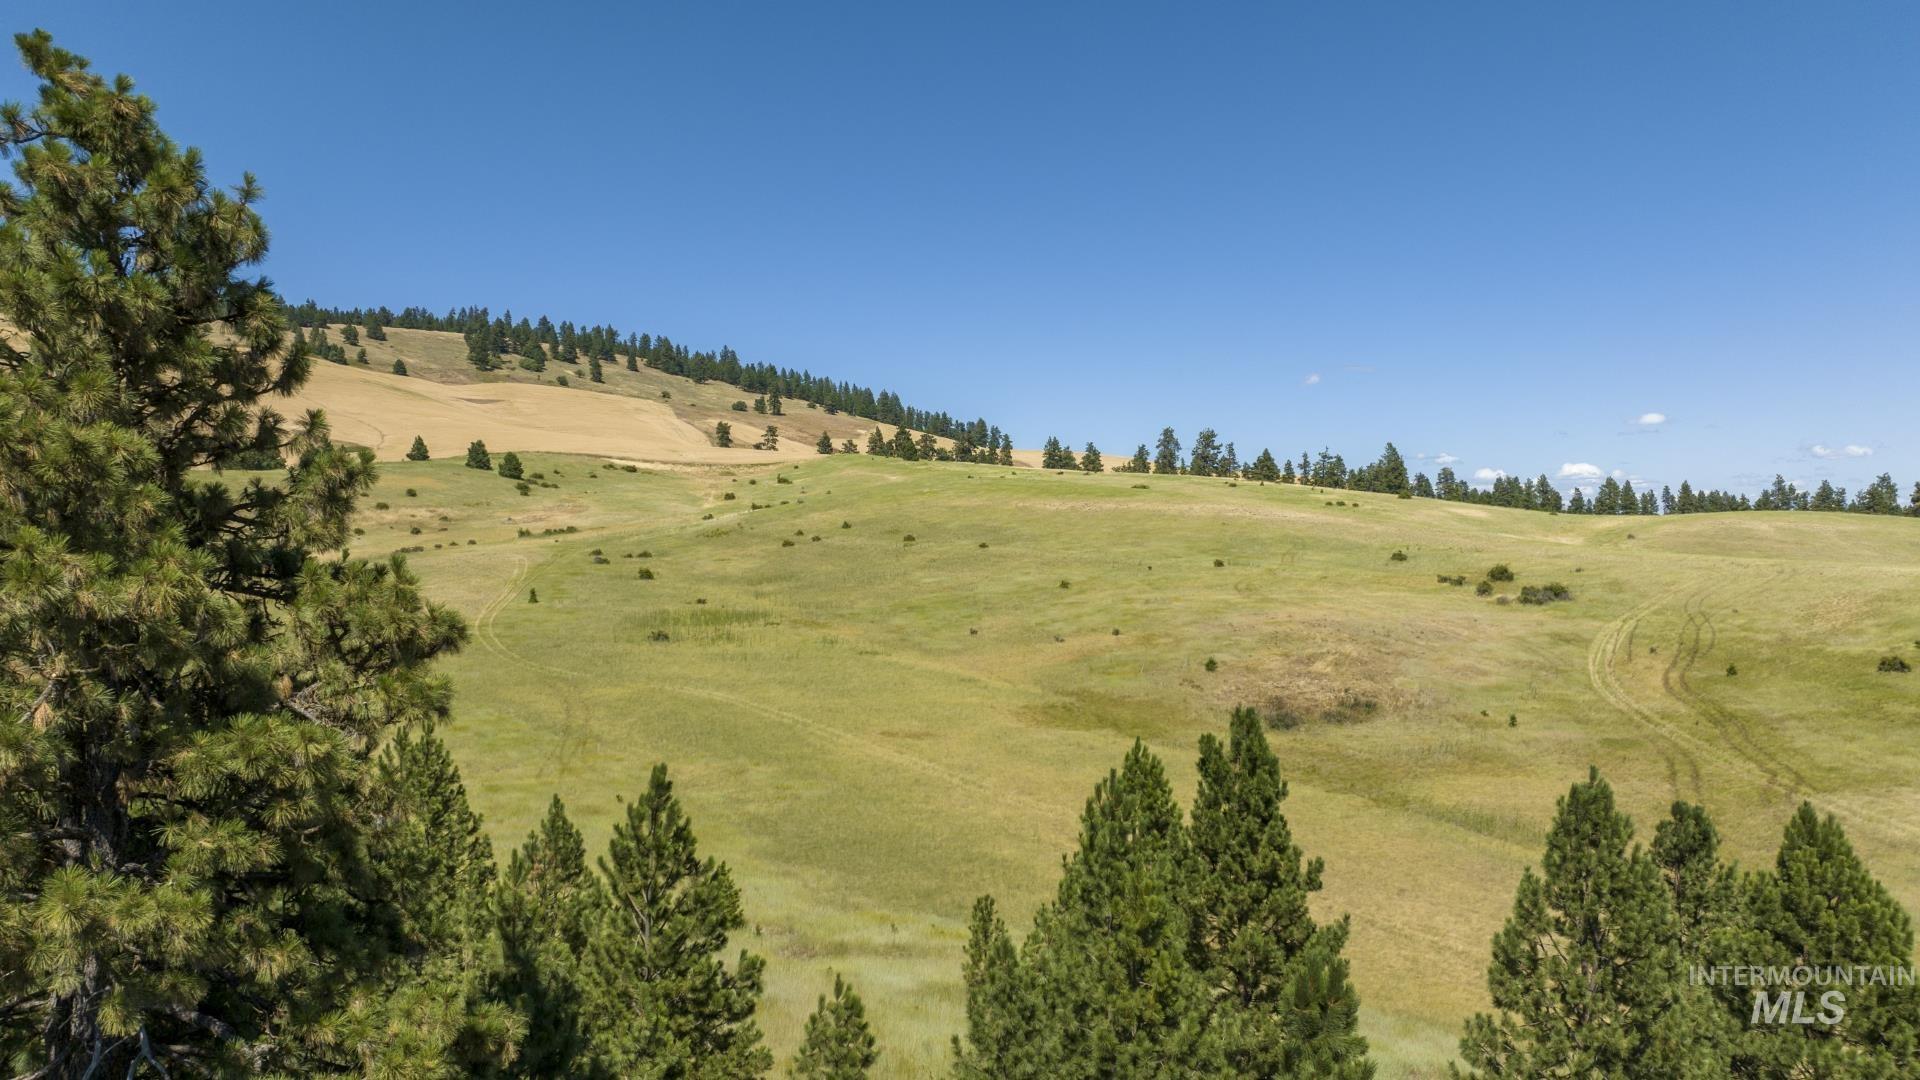 TBD Parcel # 3 Lenville, Moscow, Idaho 83843, Land For Sale, Price $553,350,MLS 98906679